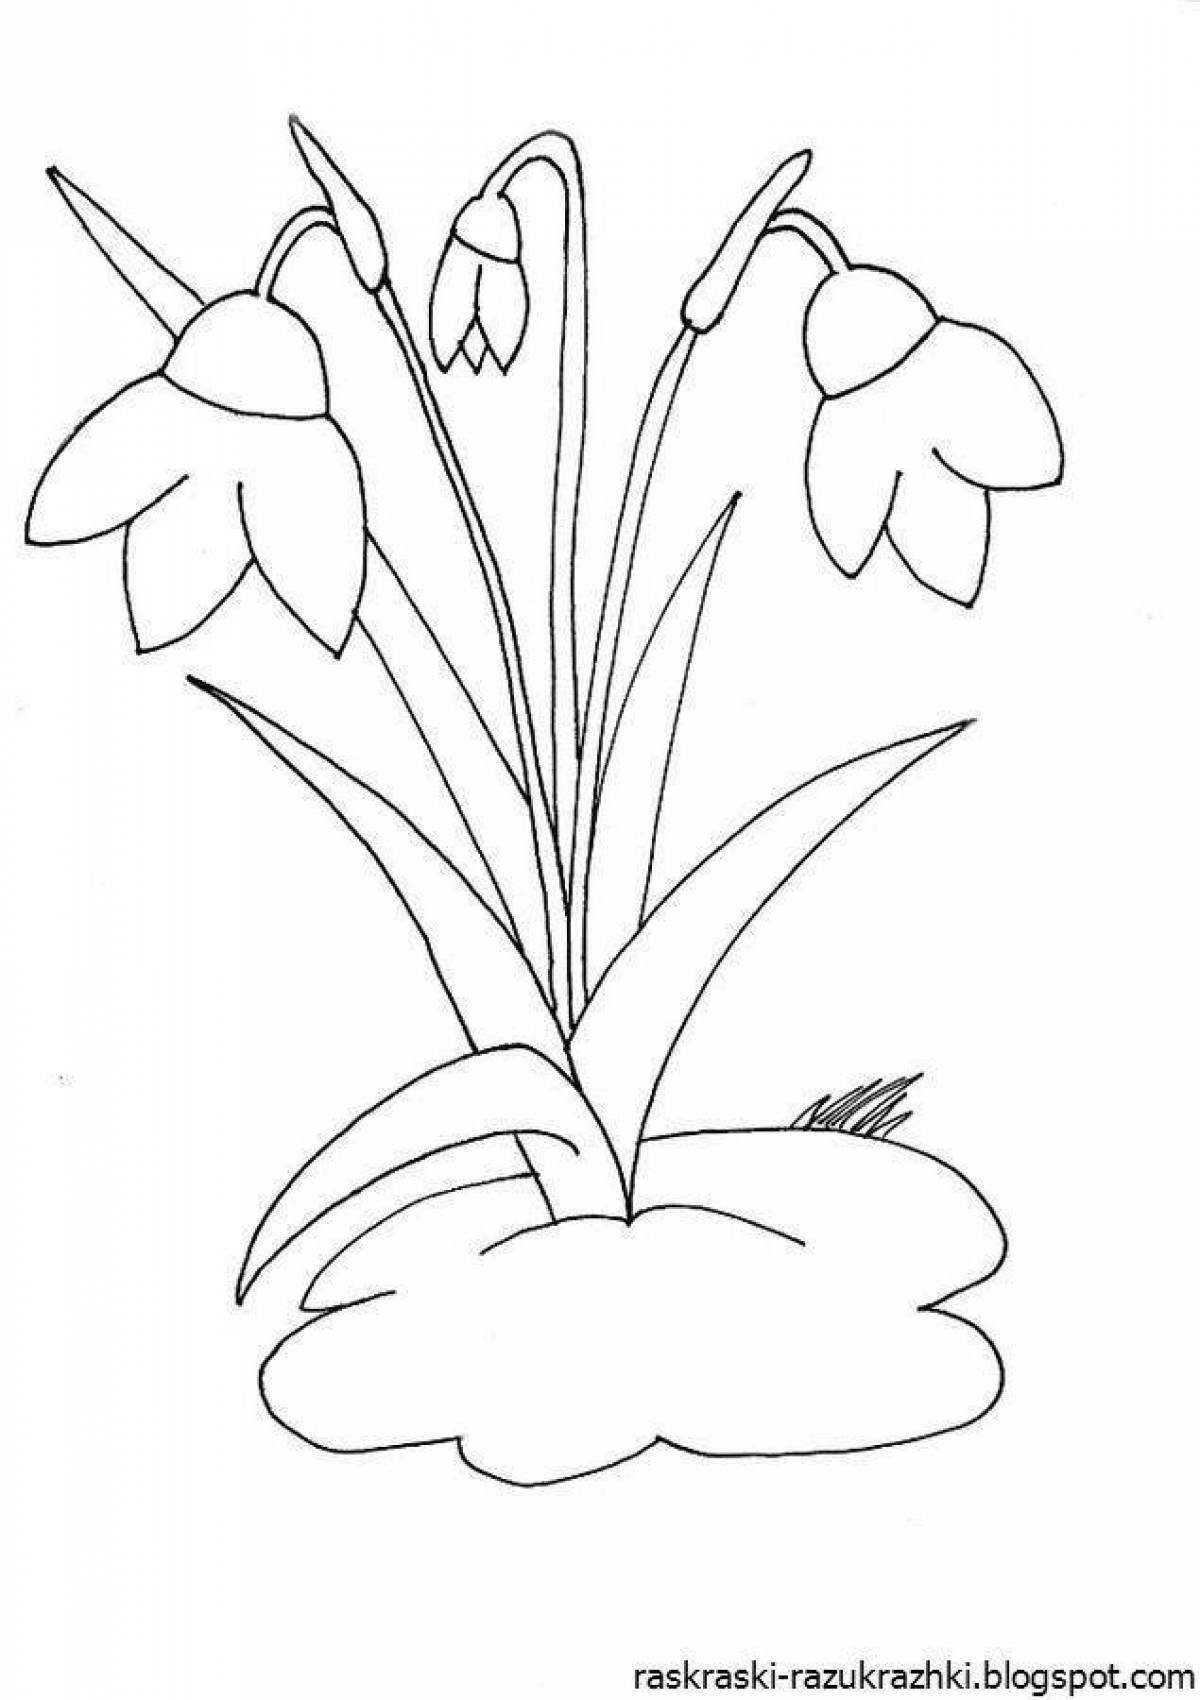 Colorful snowdrops coloring pages for kids